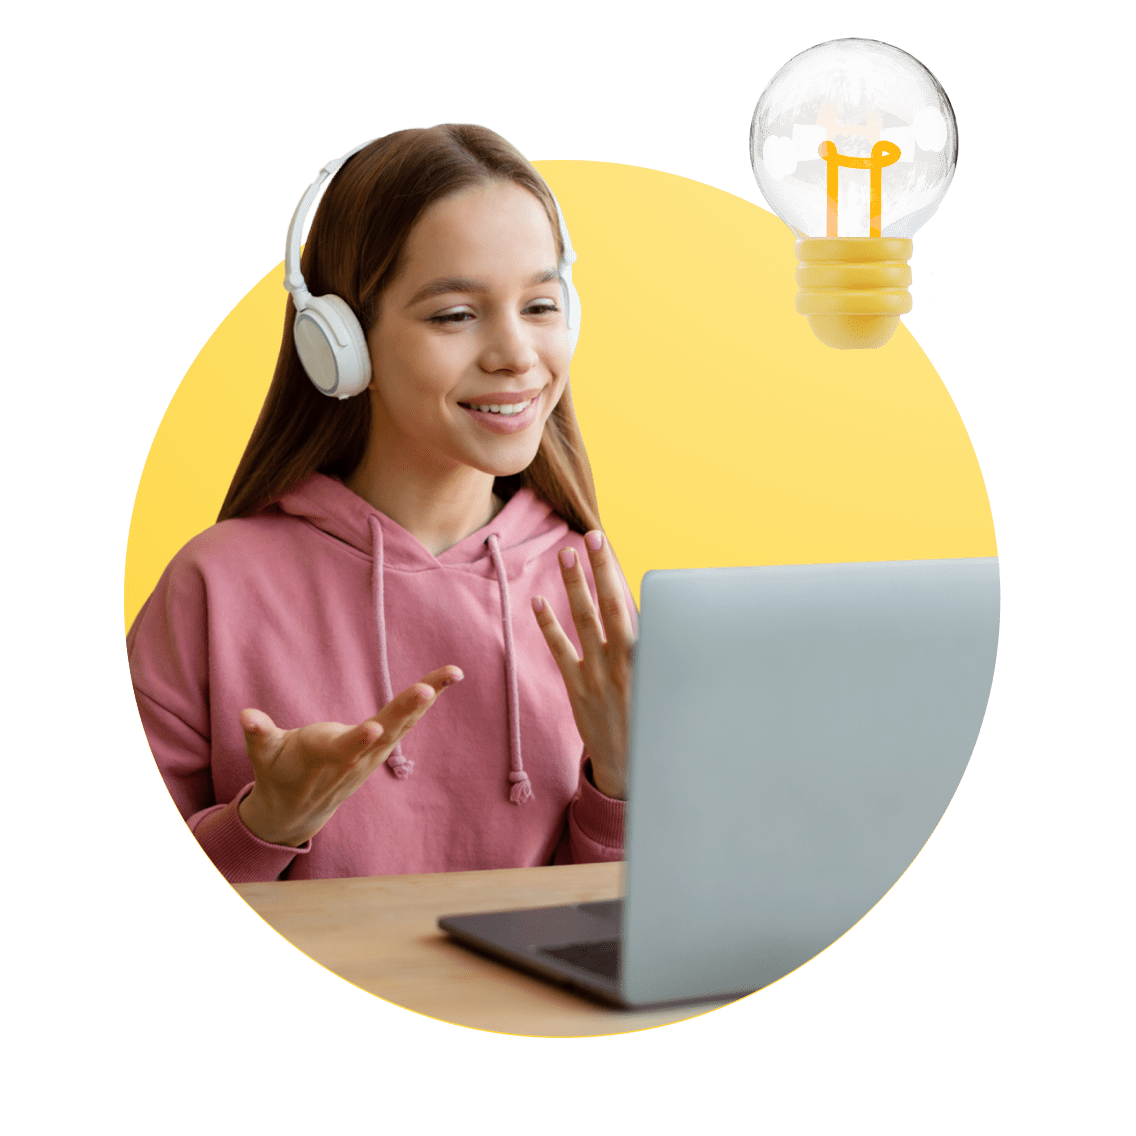 Types of Home-schoolers and Online Learners image 7 (name 4 Young Girl Desk Headphones Light)